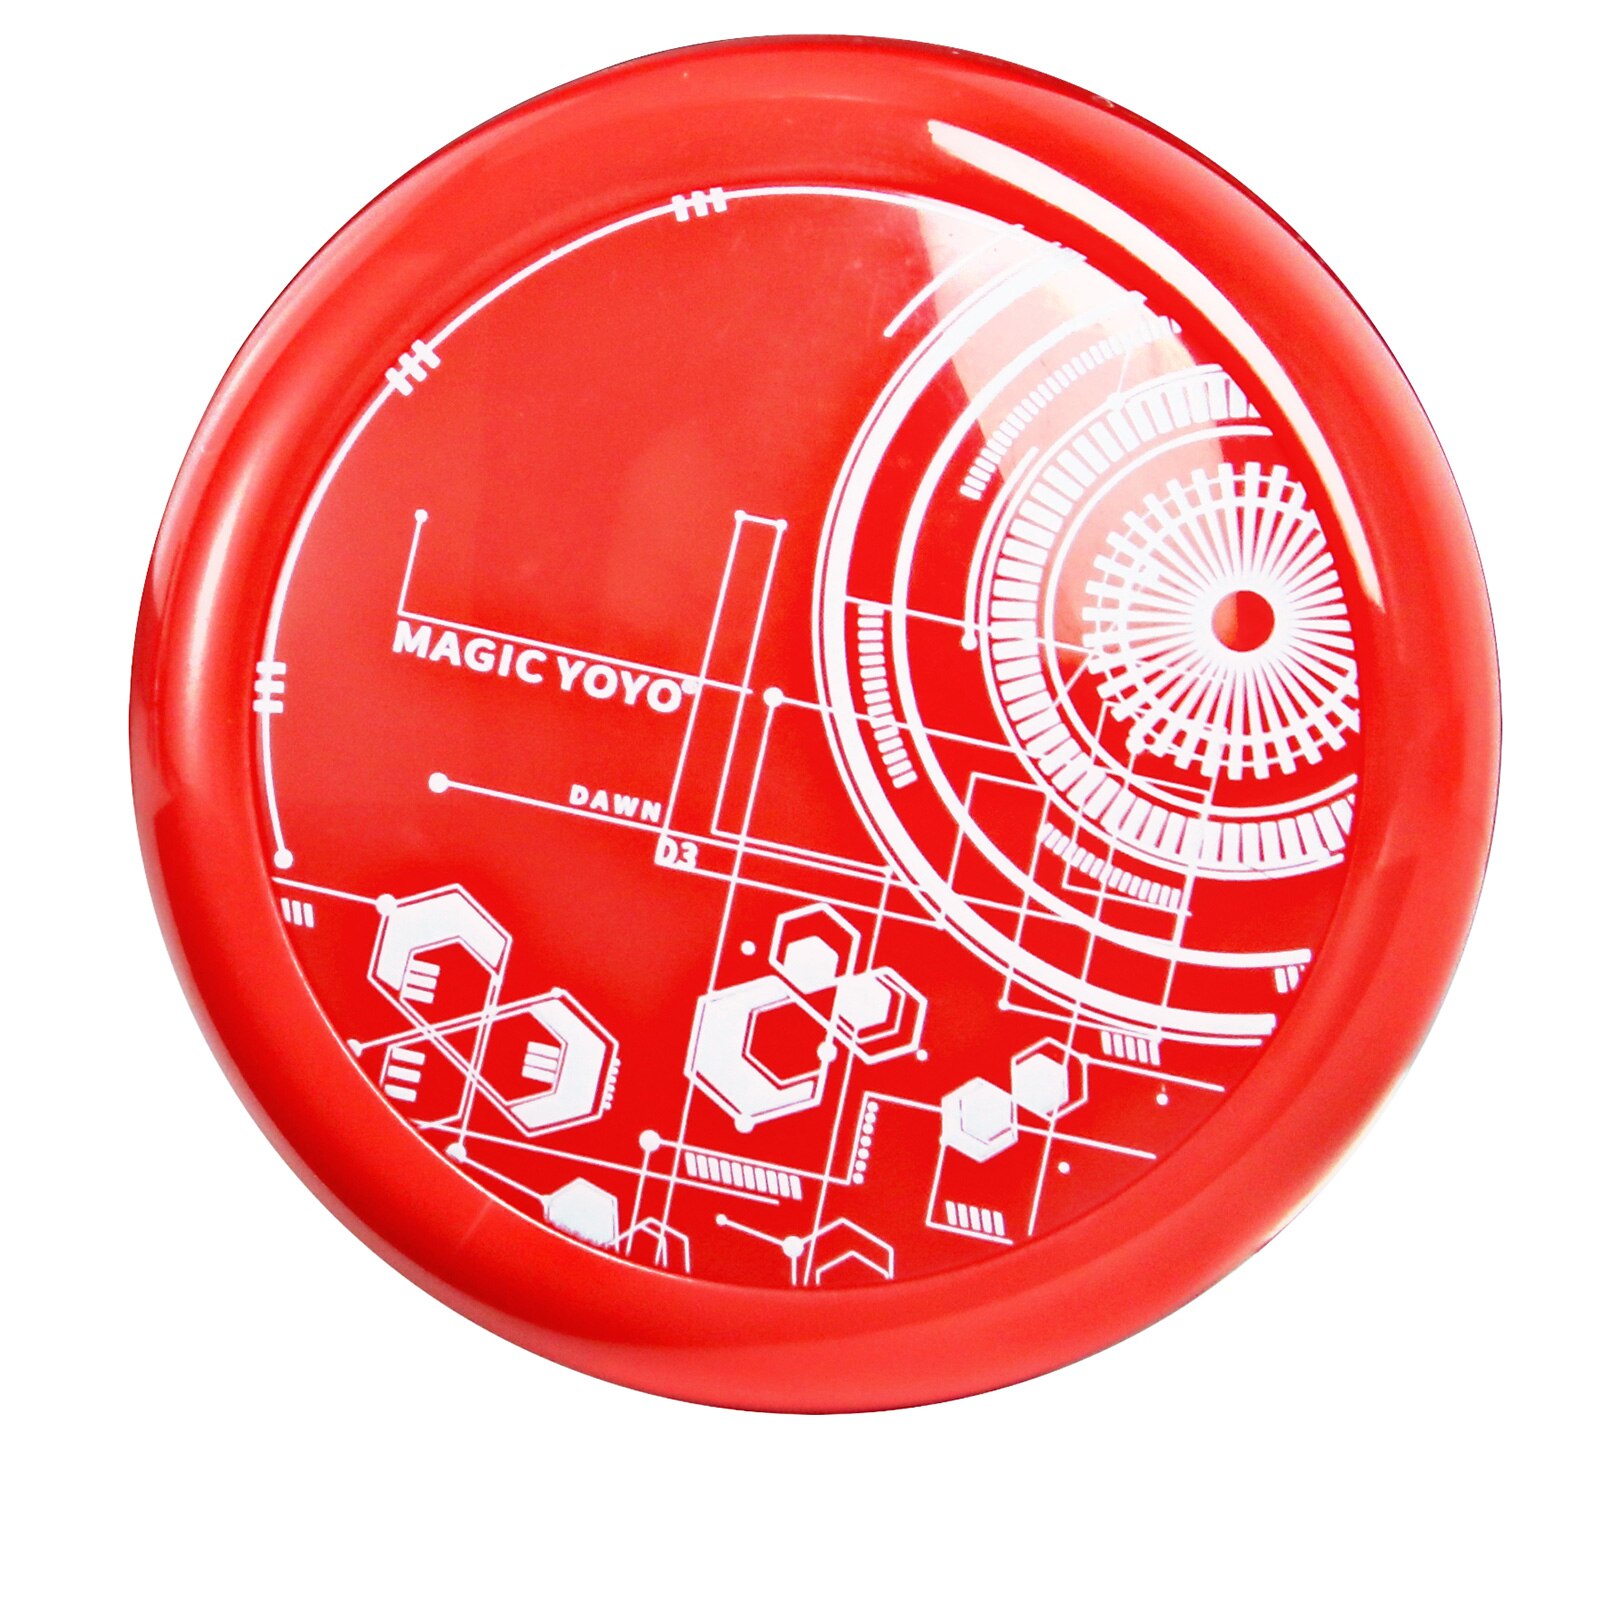 Responsive Yoyos for Kids Classic Baby Toys Beginner Yoyo with Narrow Bearing Steel Axle ABS Body Looping Play Spinning Faster: Red